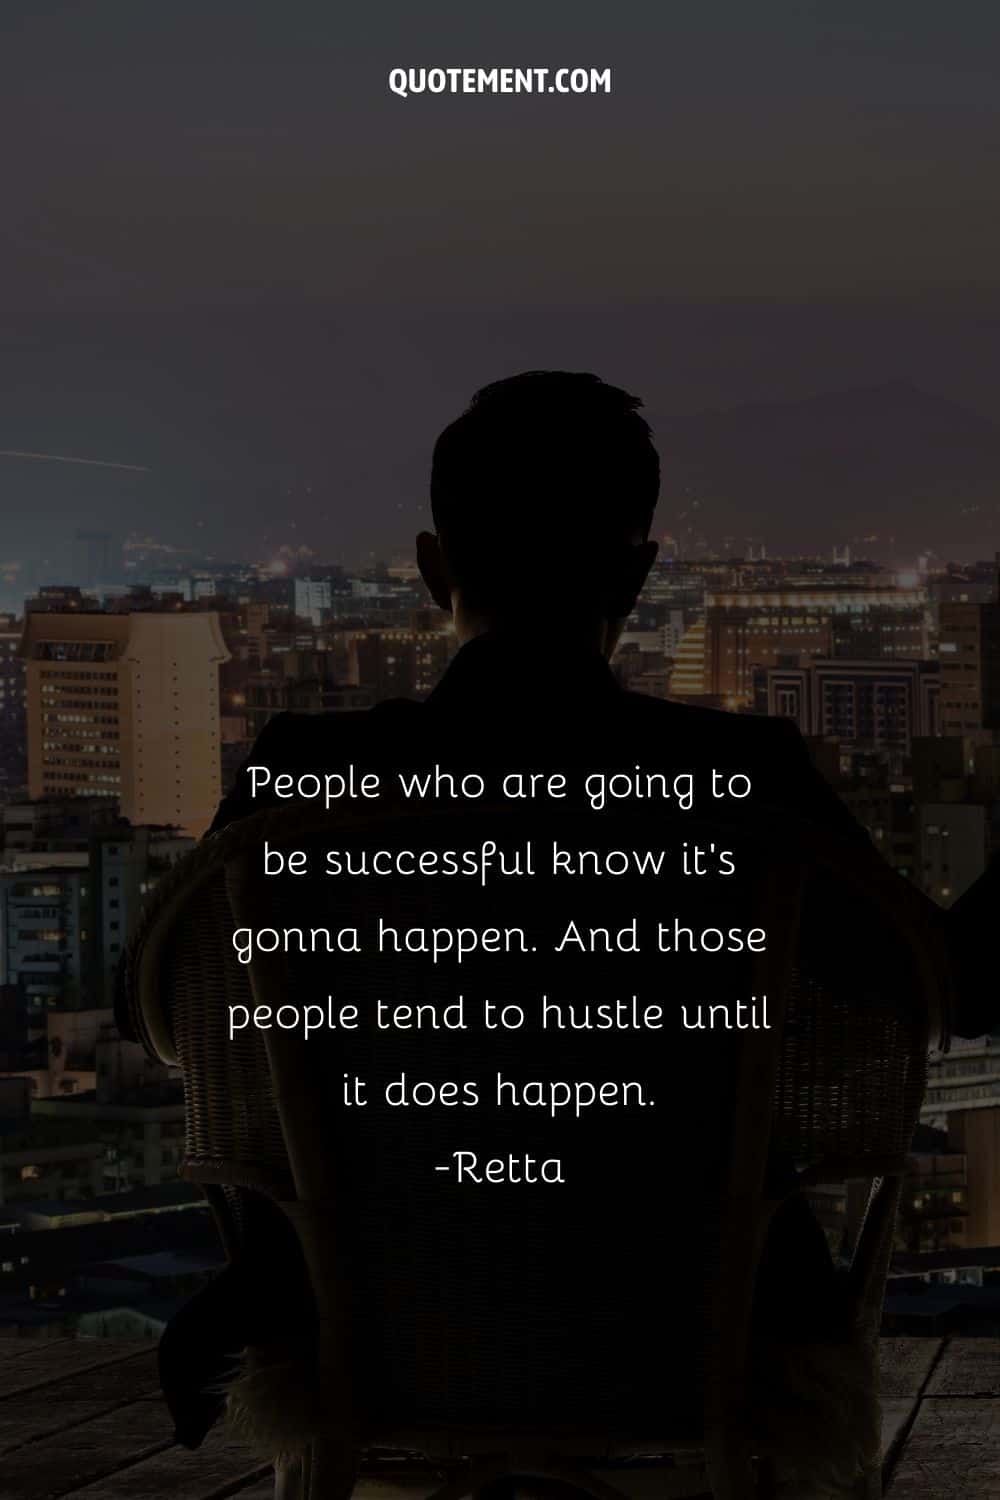 a guy observing the city image representing hustlers motivational quote on success